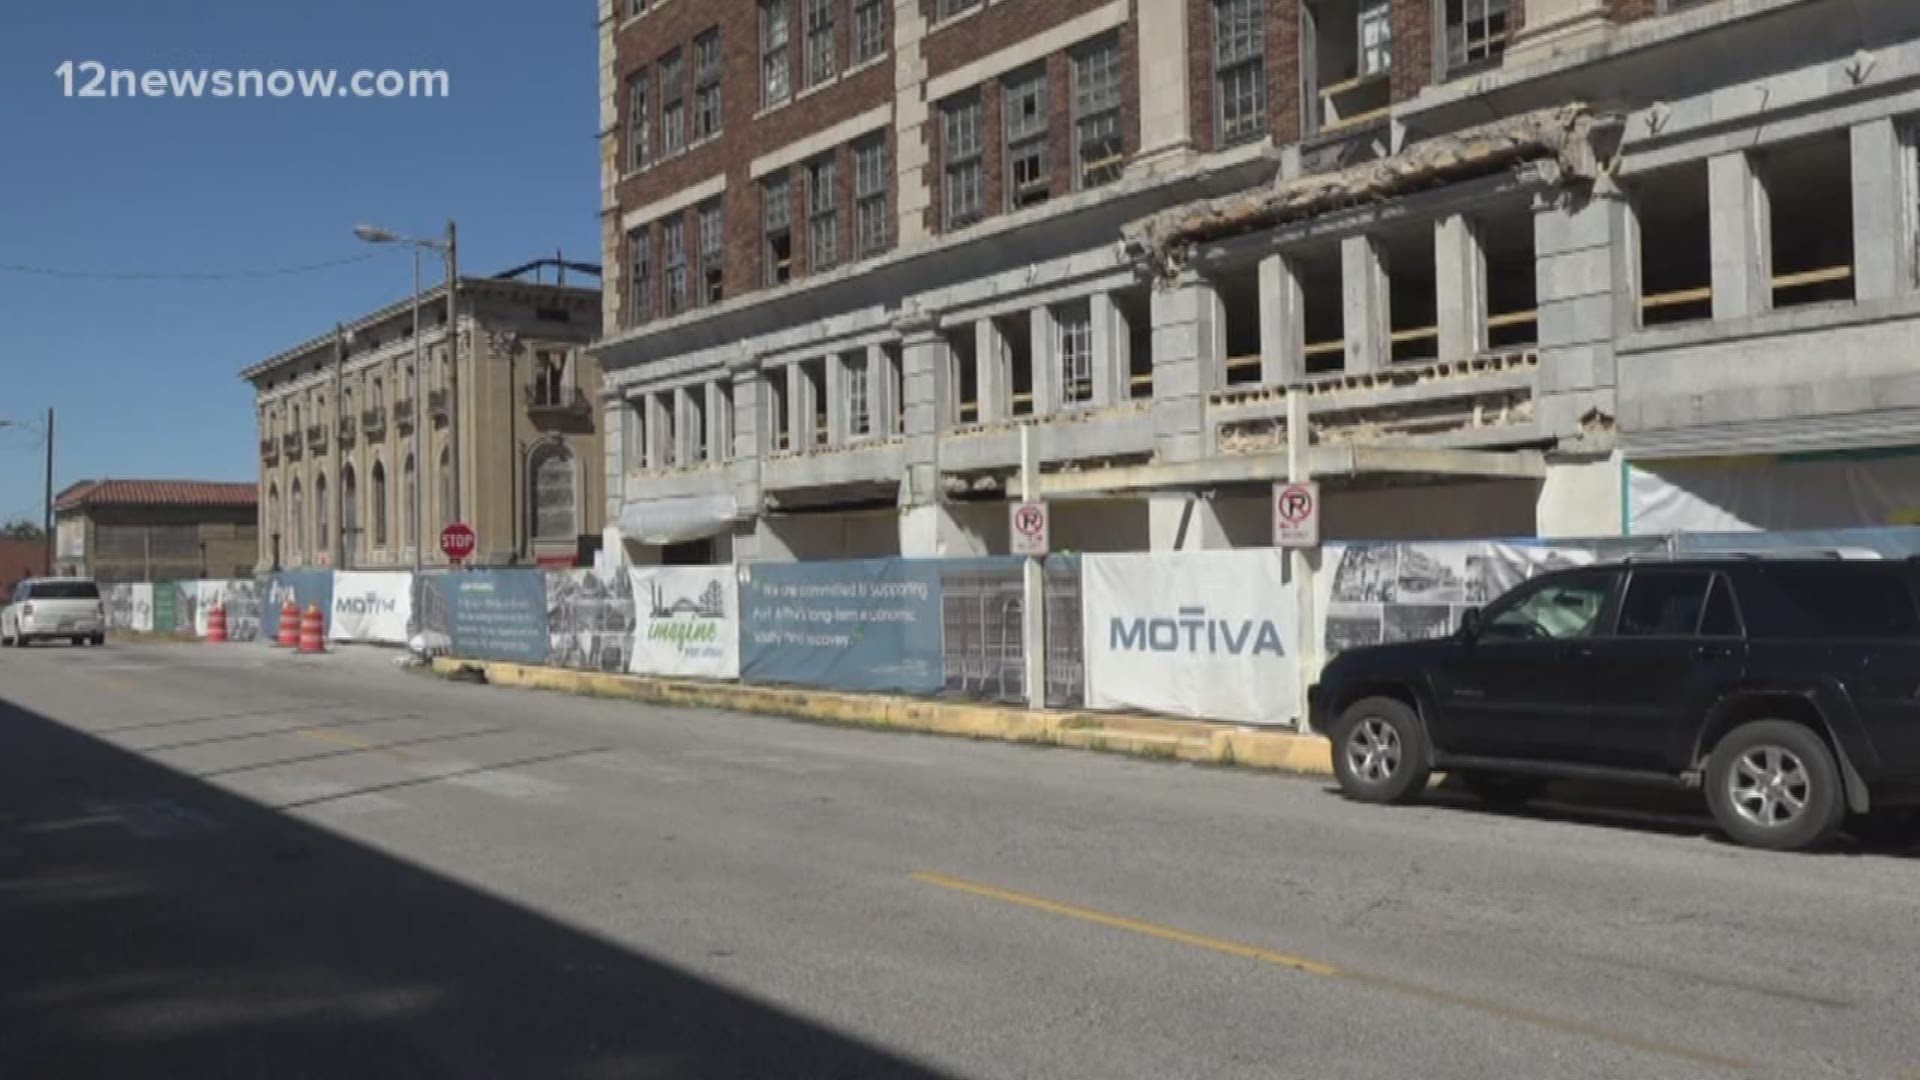 Motiva has an aggressive timeline, so it's moving fast with the construction.